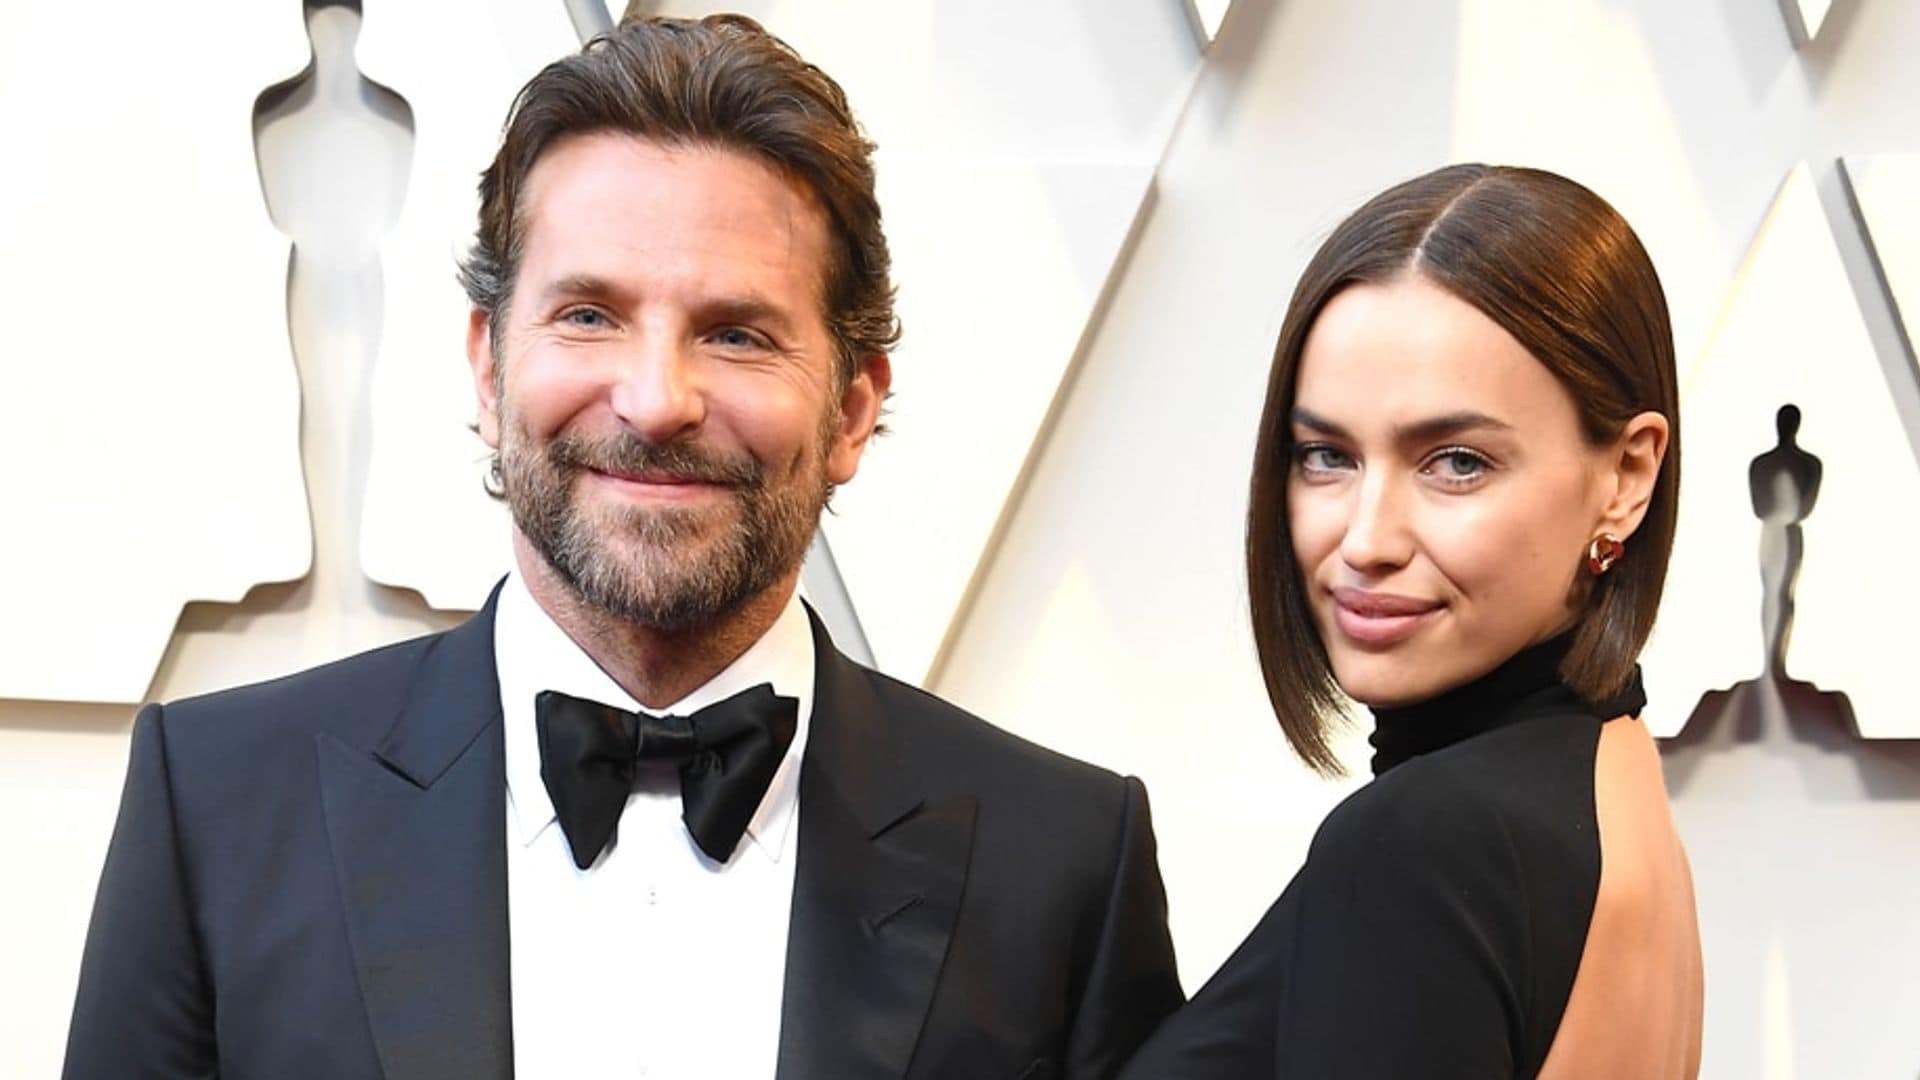 Exes Bradley Cooper and Irina Shayk agree to live in same city to co-parent daughter